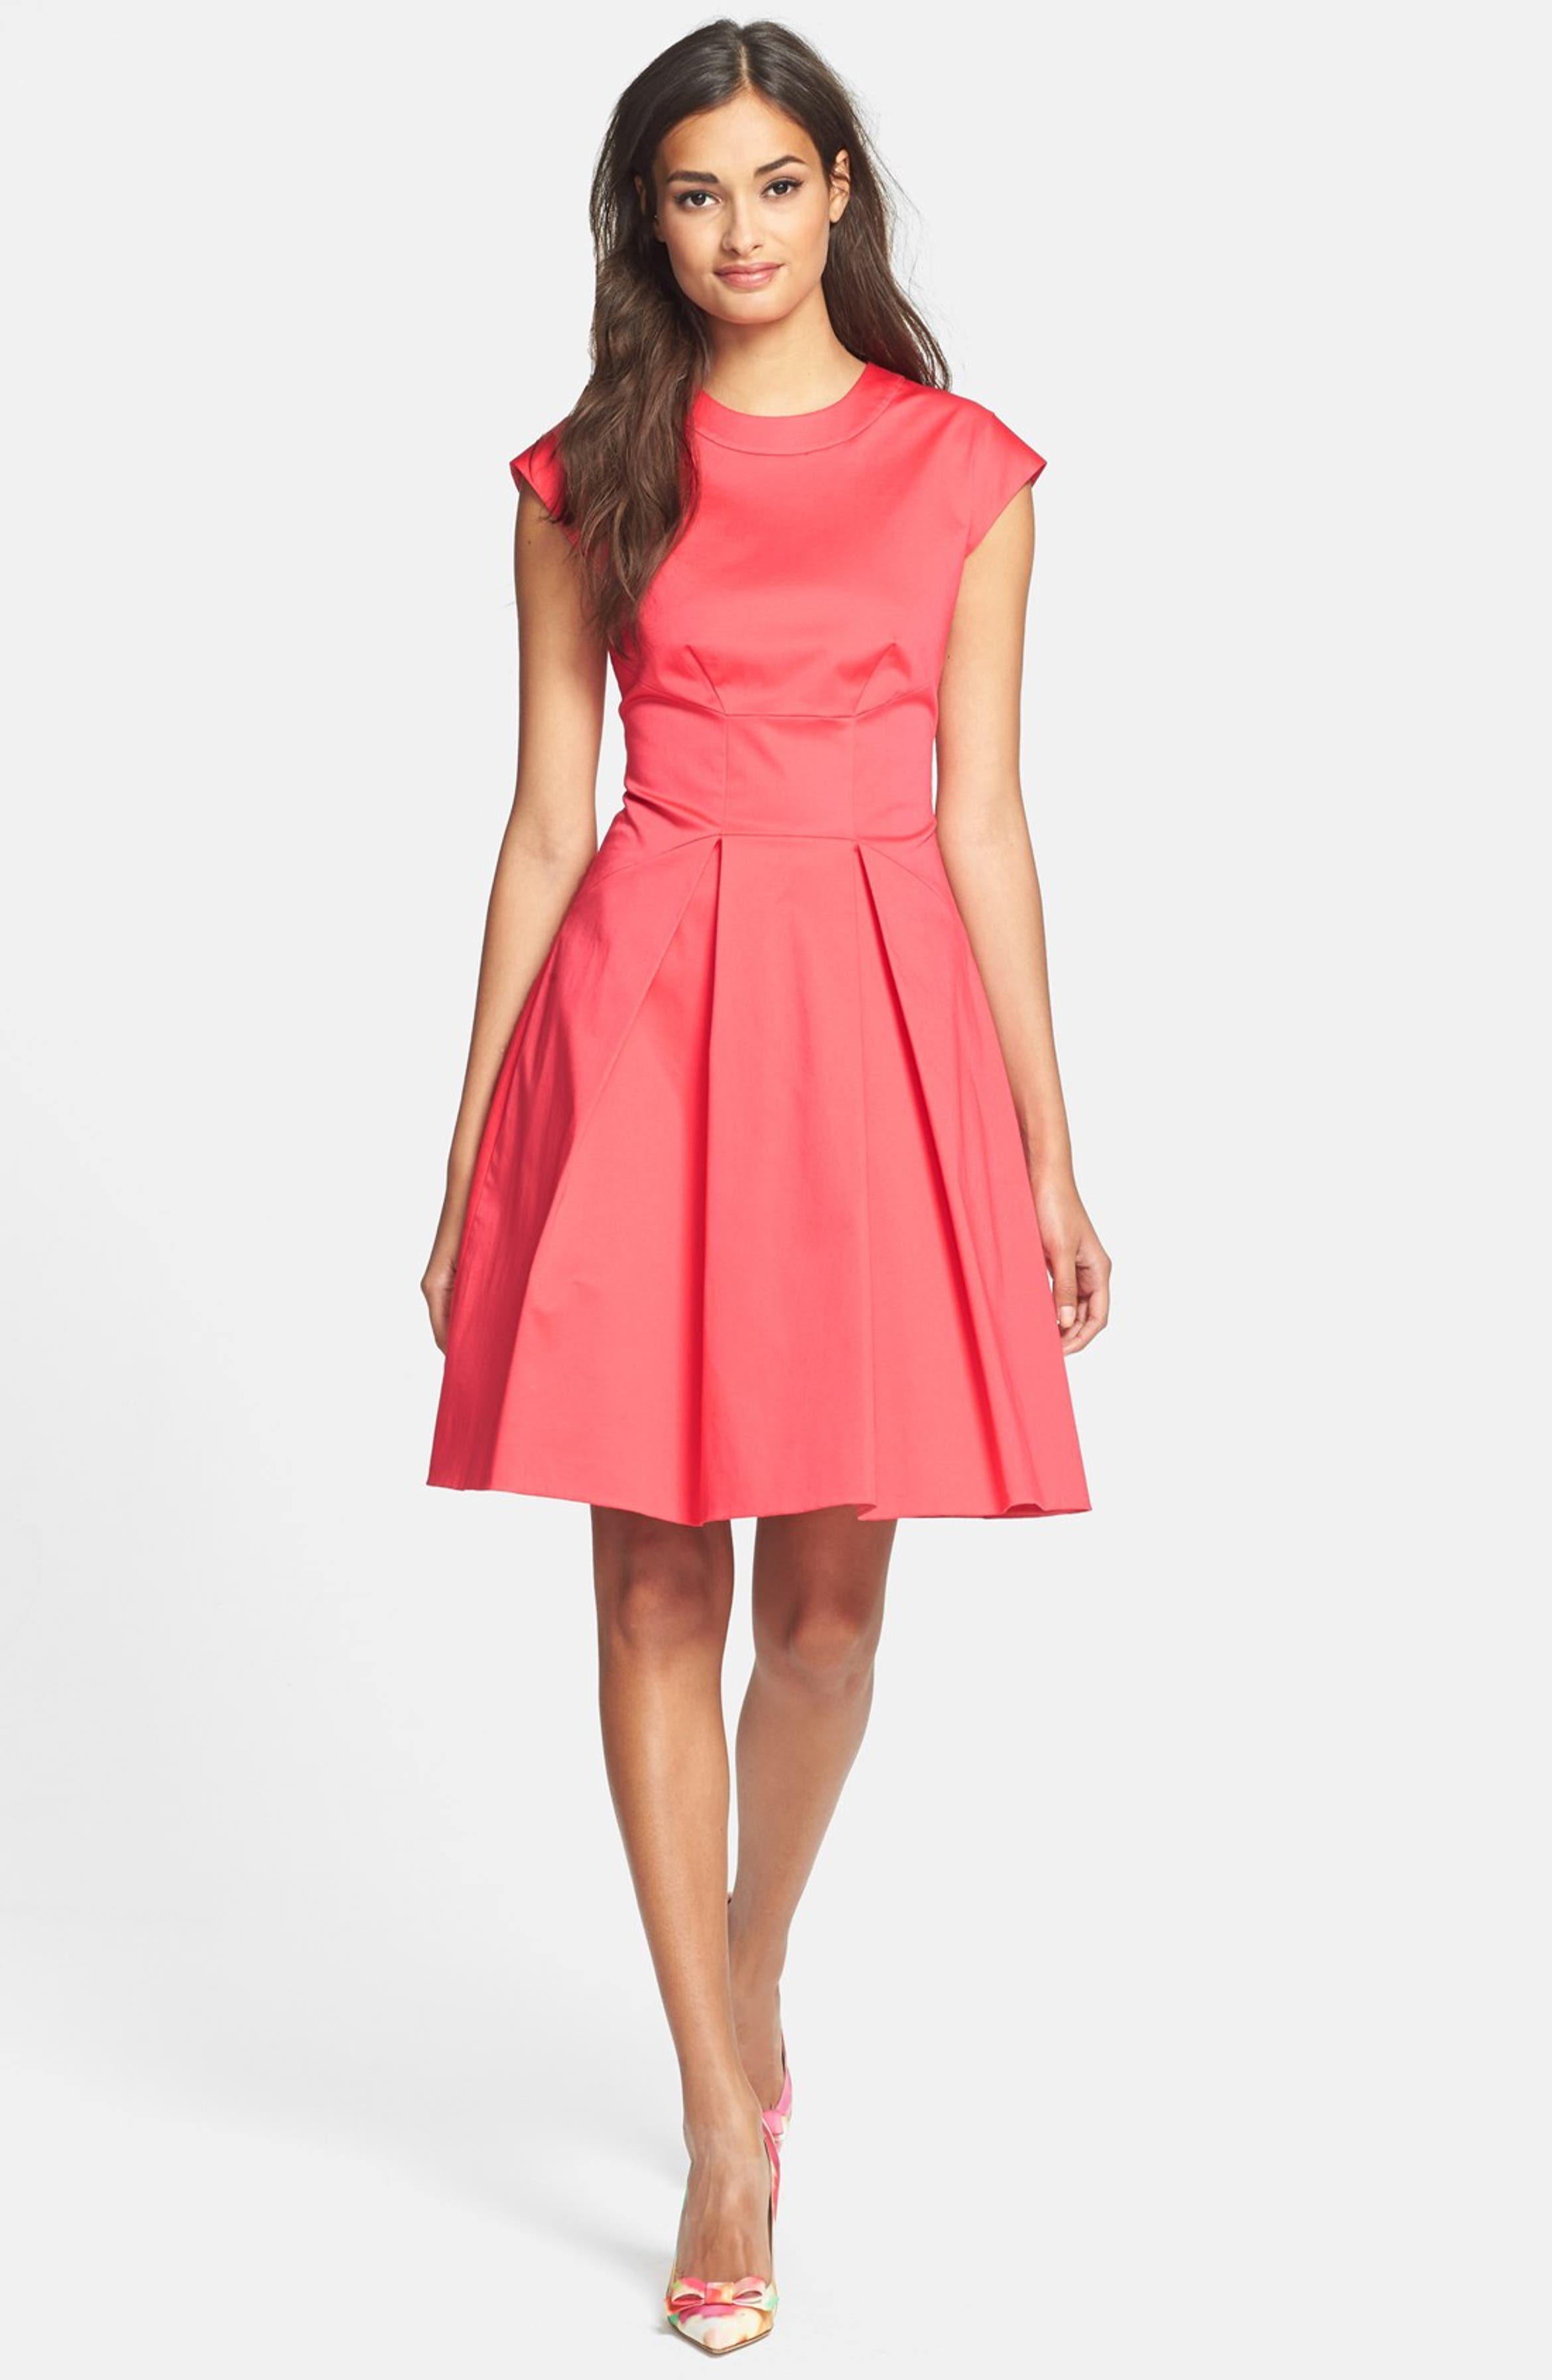 kate spade new york 'vail' cotton blend fit & flare dress | Nordstrom